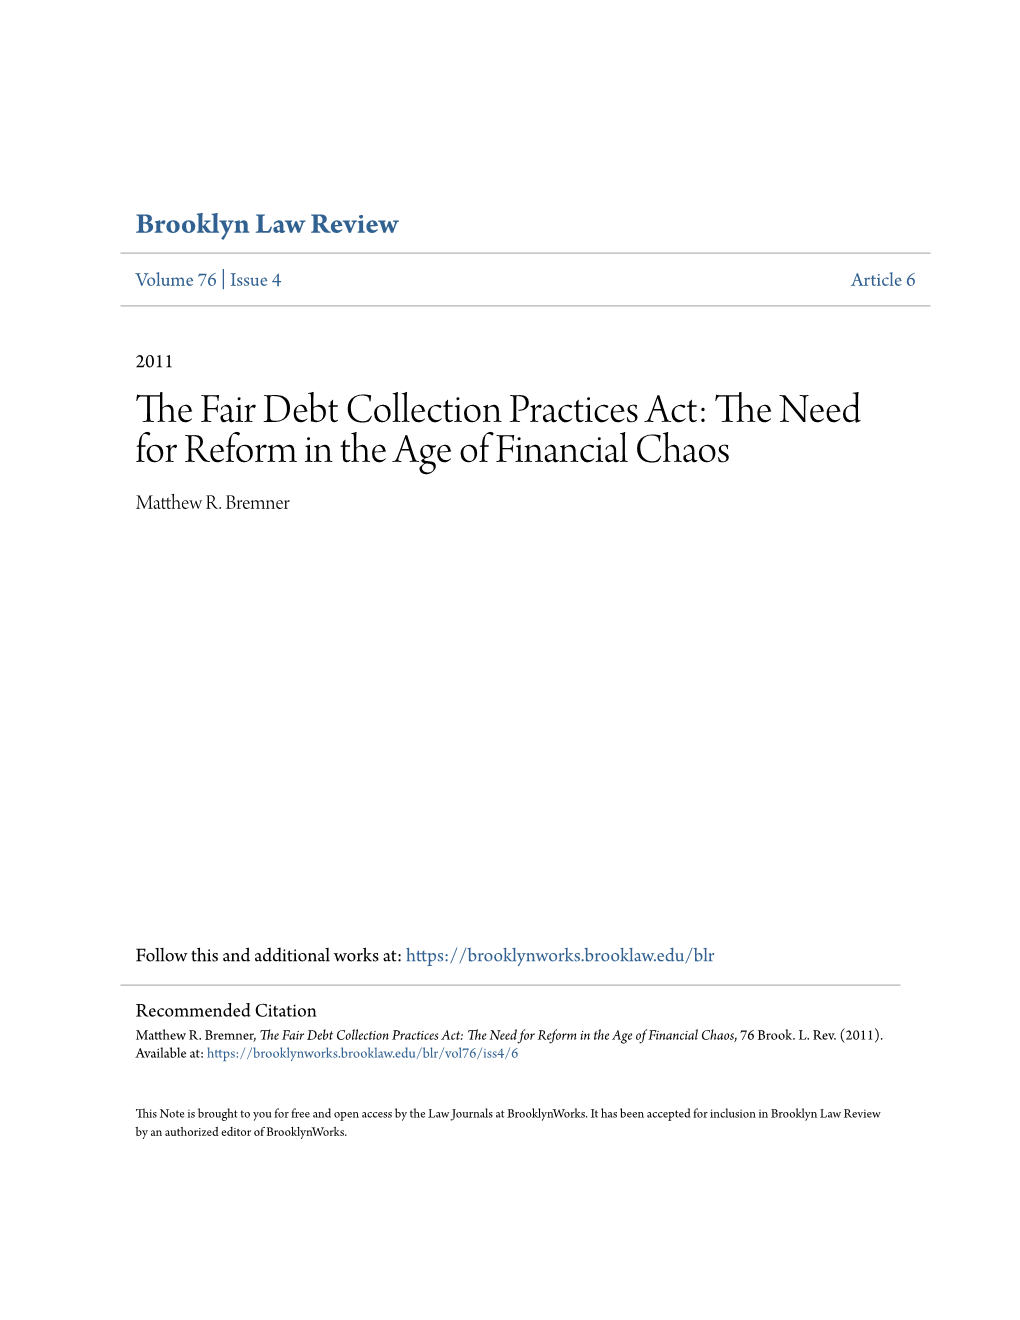 The Fair Debt Collection Practices Act: the Need for Reform in the Age of Financial Chaos, 76 Brook